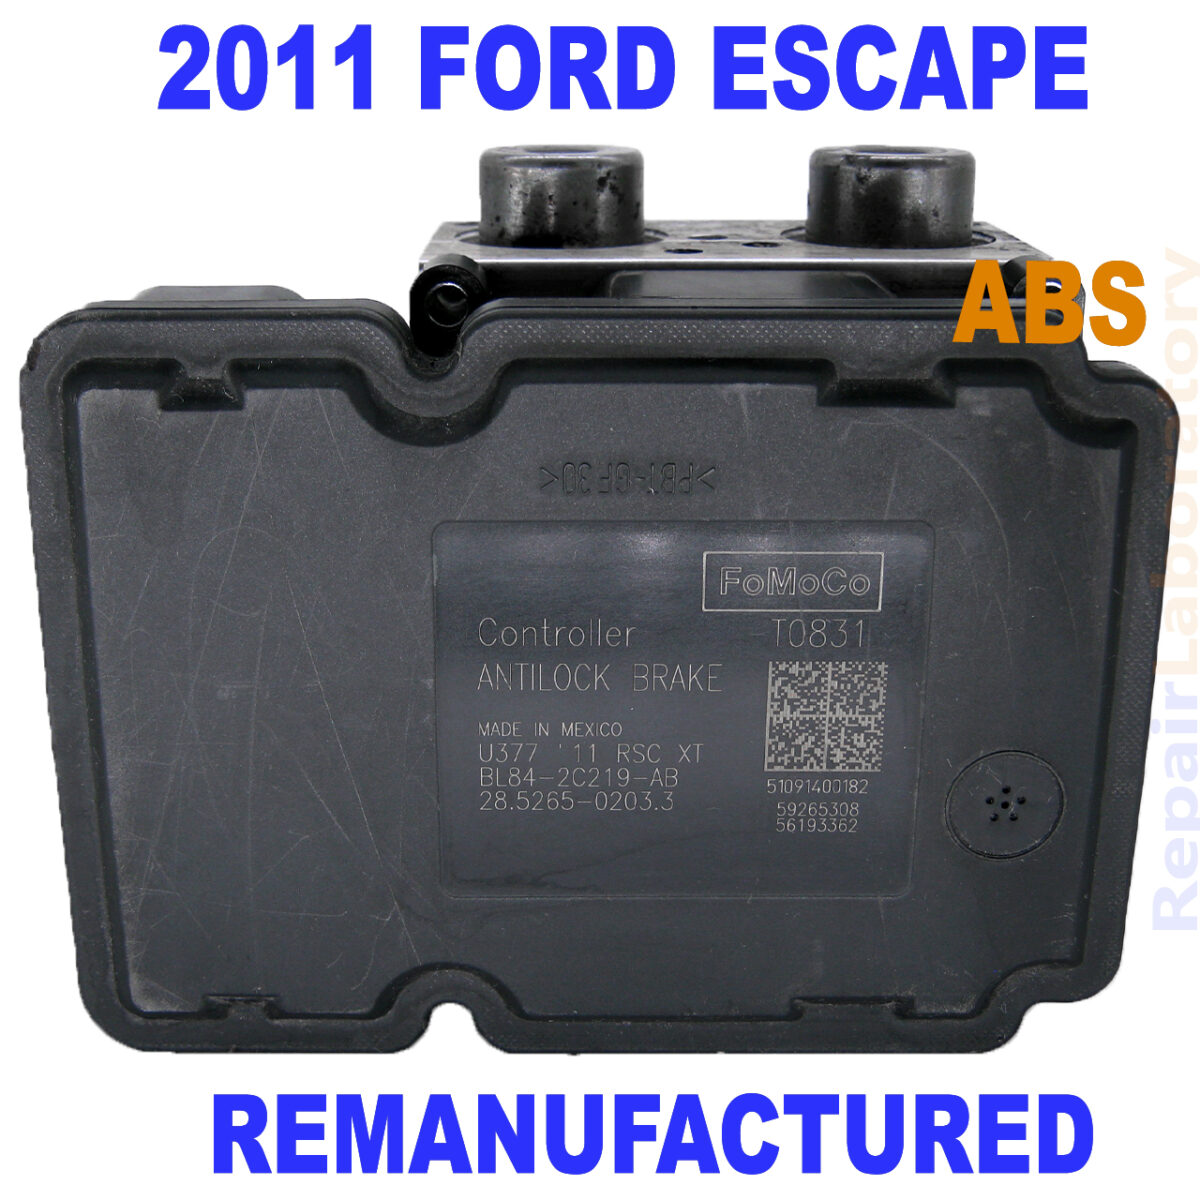 2011_ford_escape_abs_pump_assembly_BL84-2C219-AB